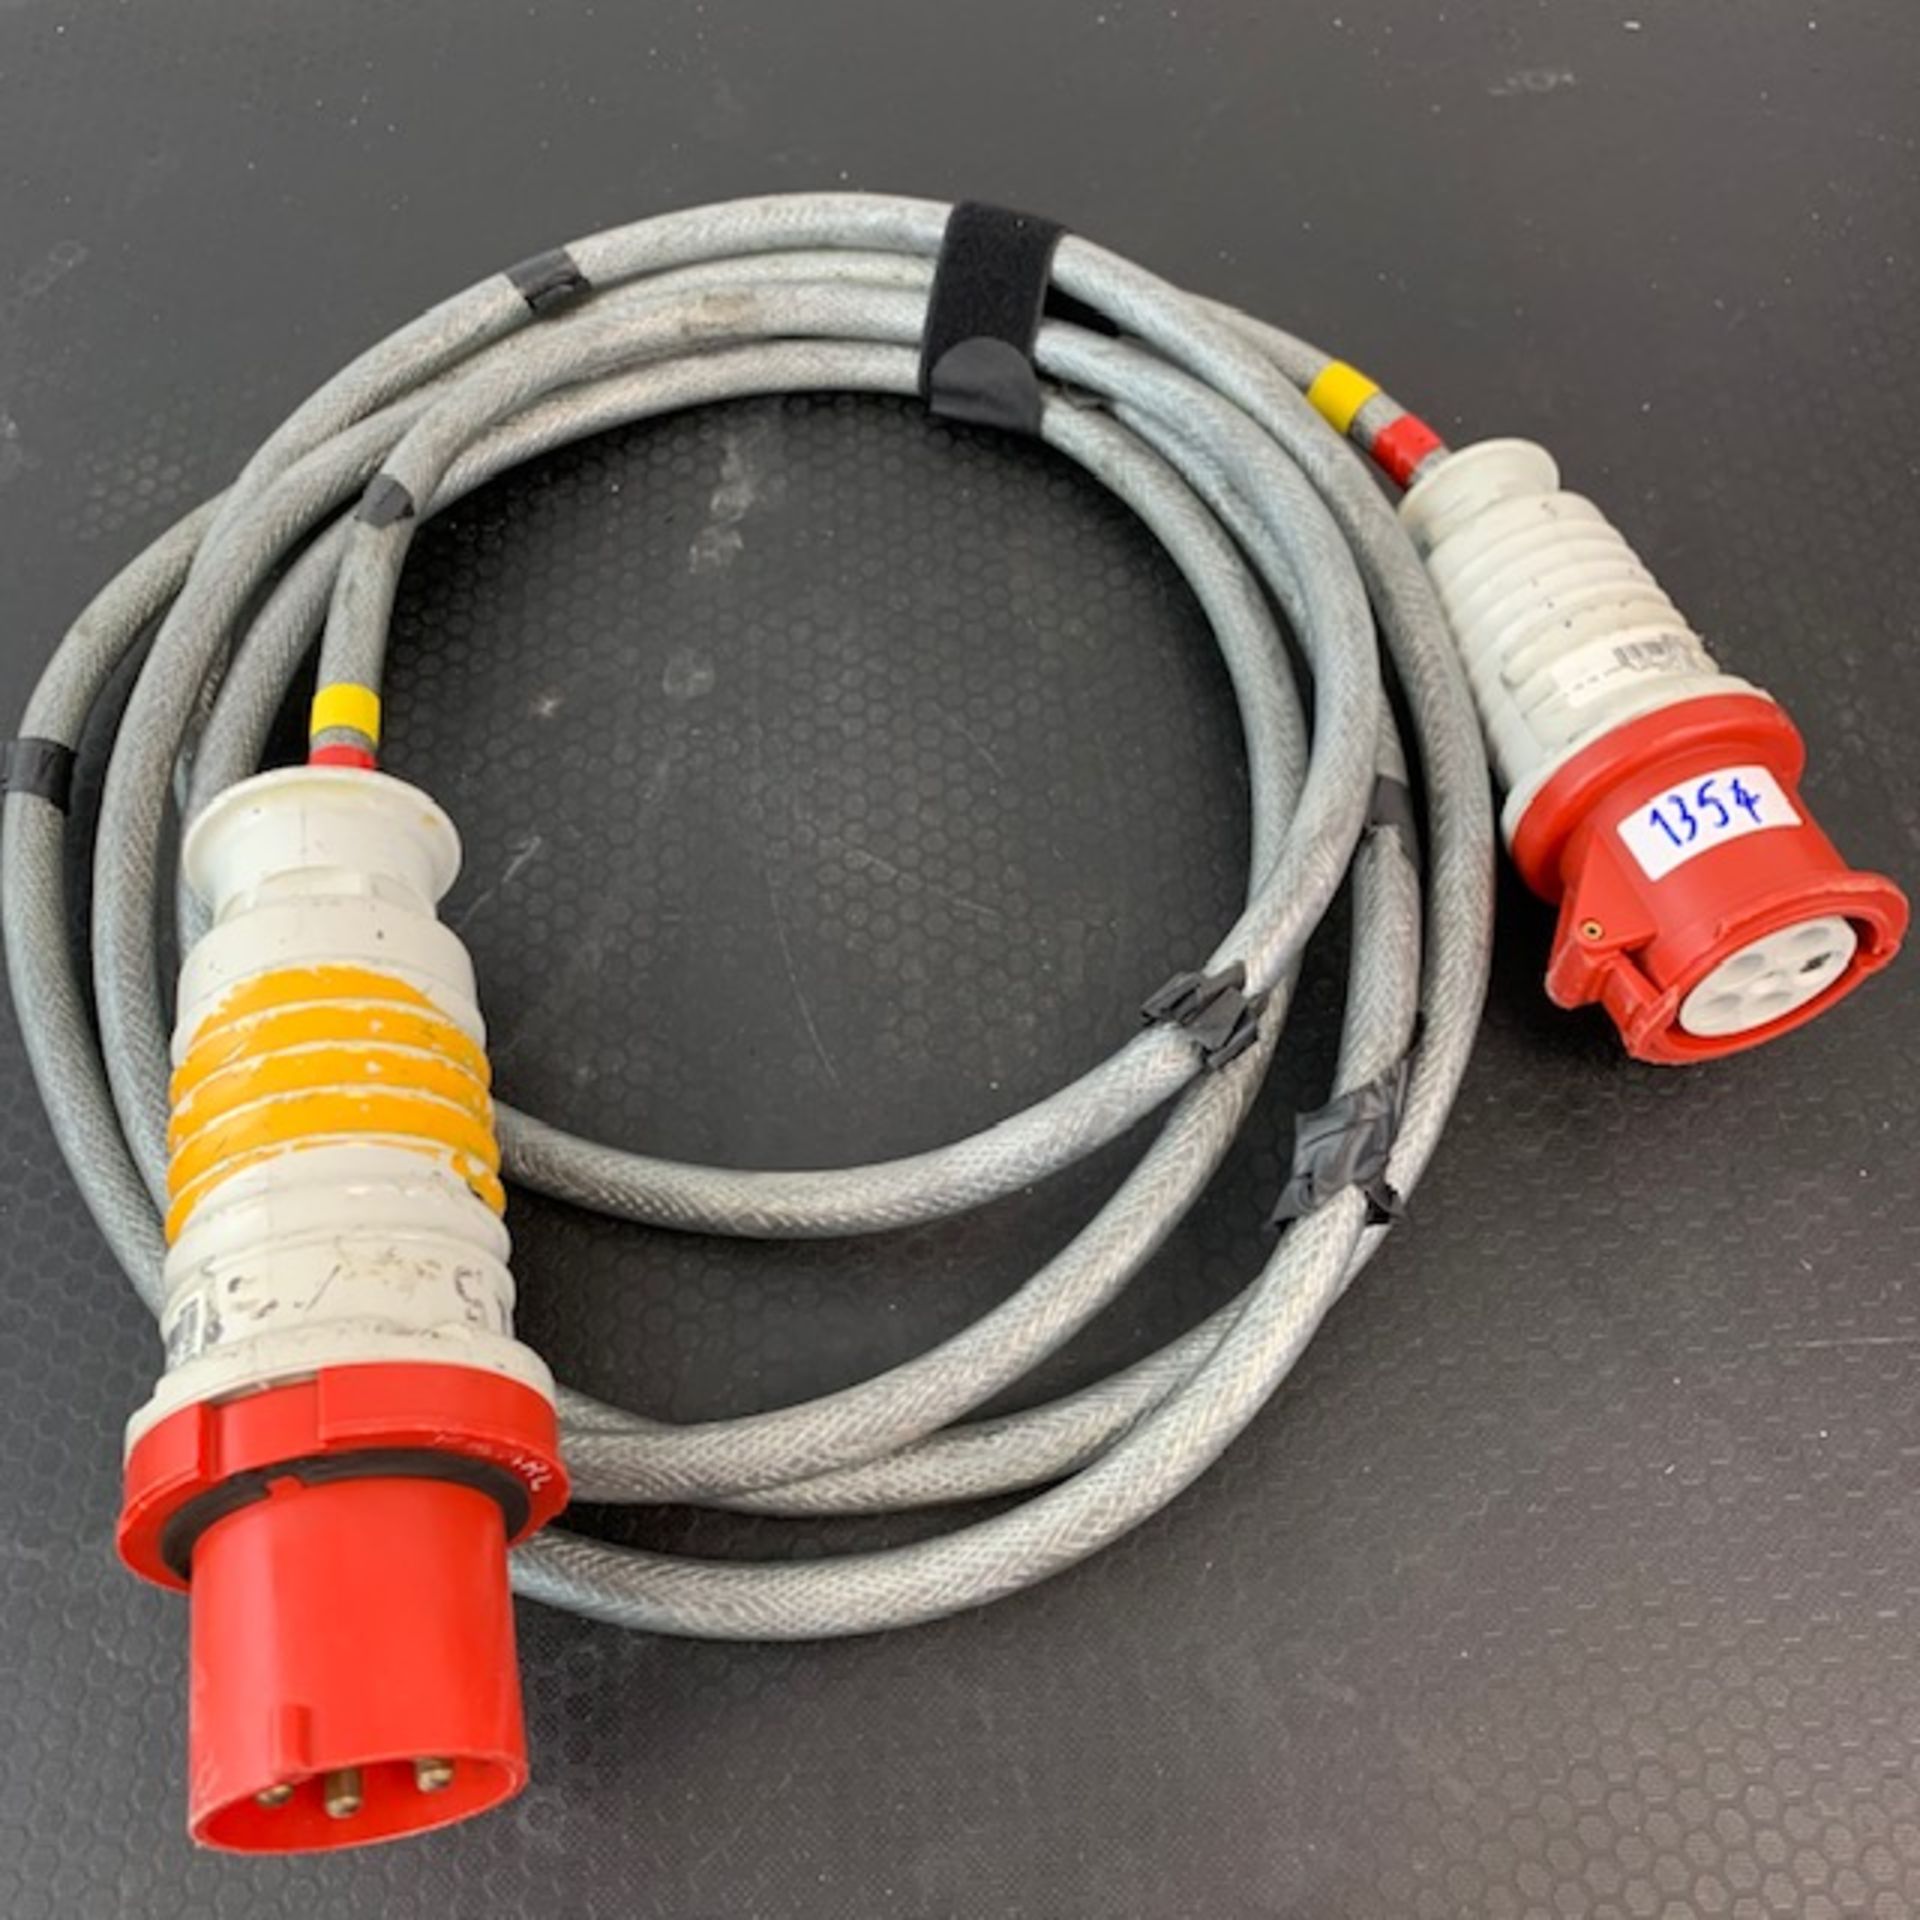 1 X 125Amp 3 Phase 5M Reinforced Cable - Ref: 1354 - CL581 - Location: Altrincham Wa14